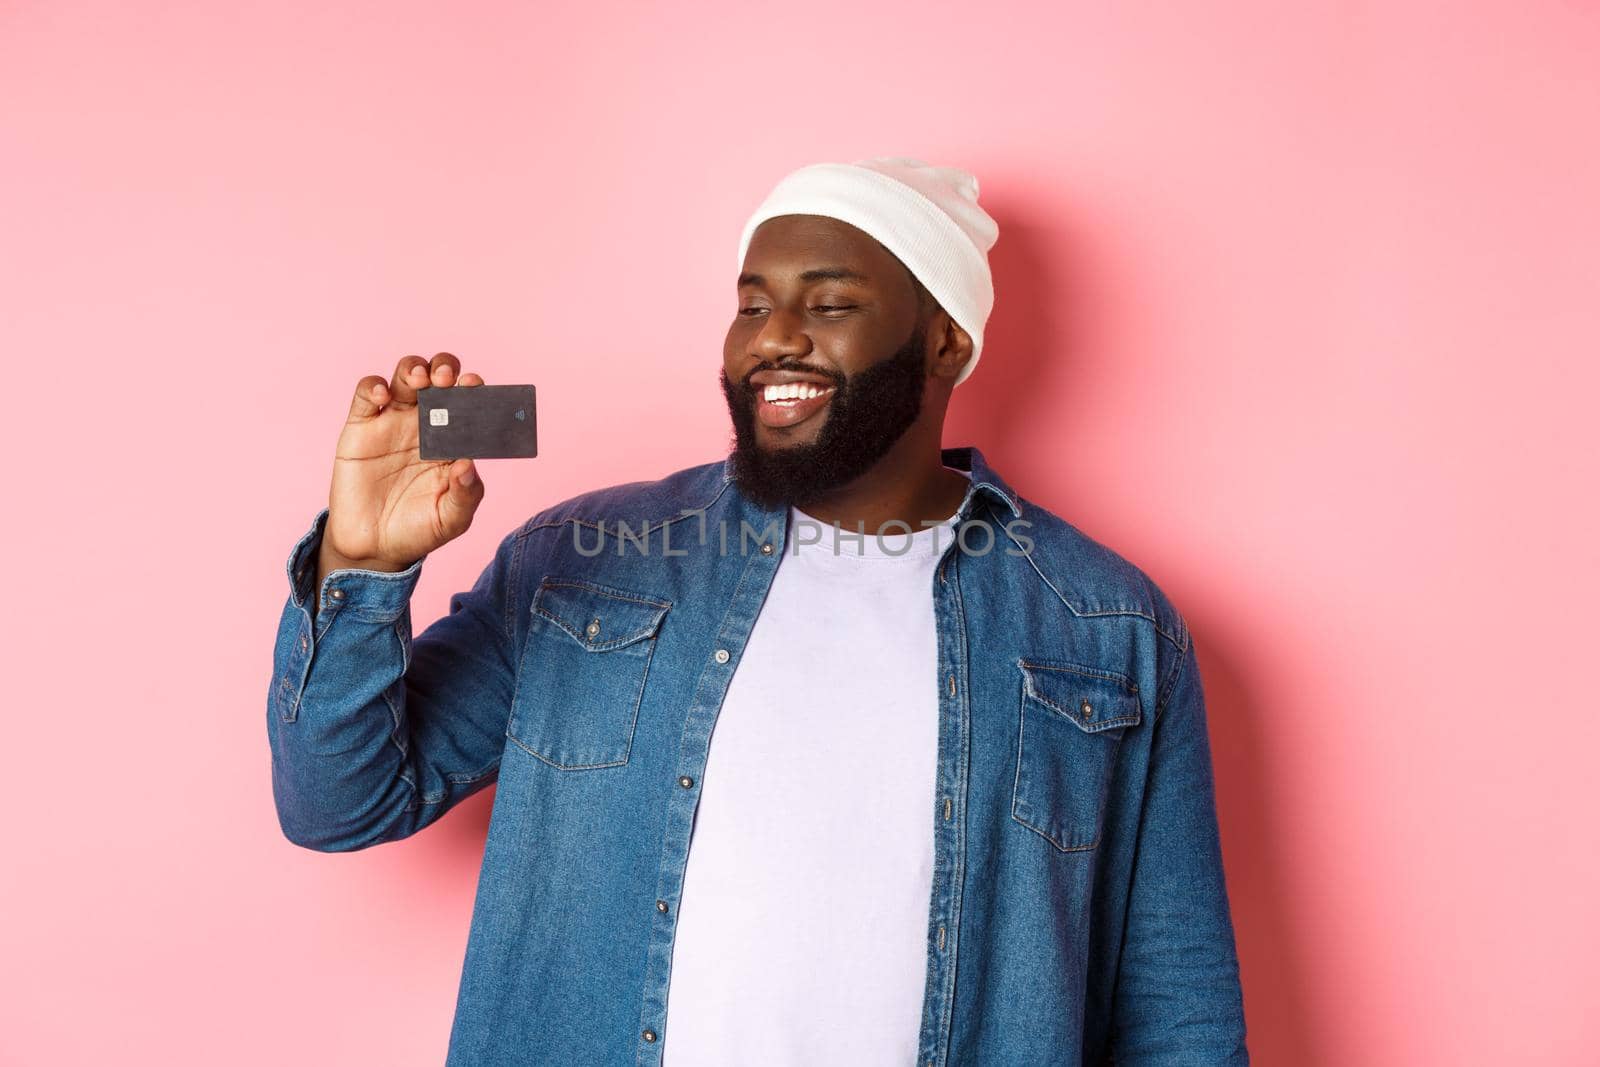 Shopping concept. Image of happy african-american man looking satisfied at credit card, recommending bank, standing over pink background.